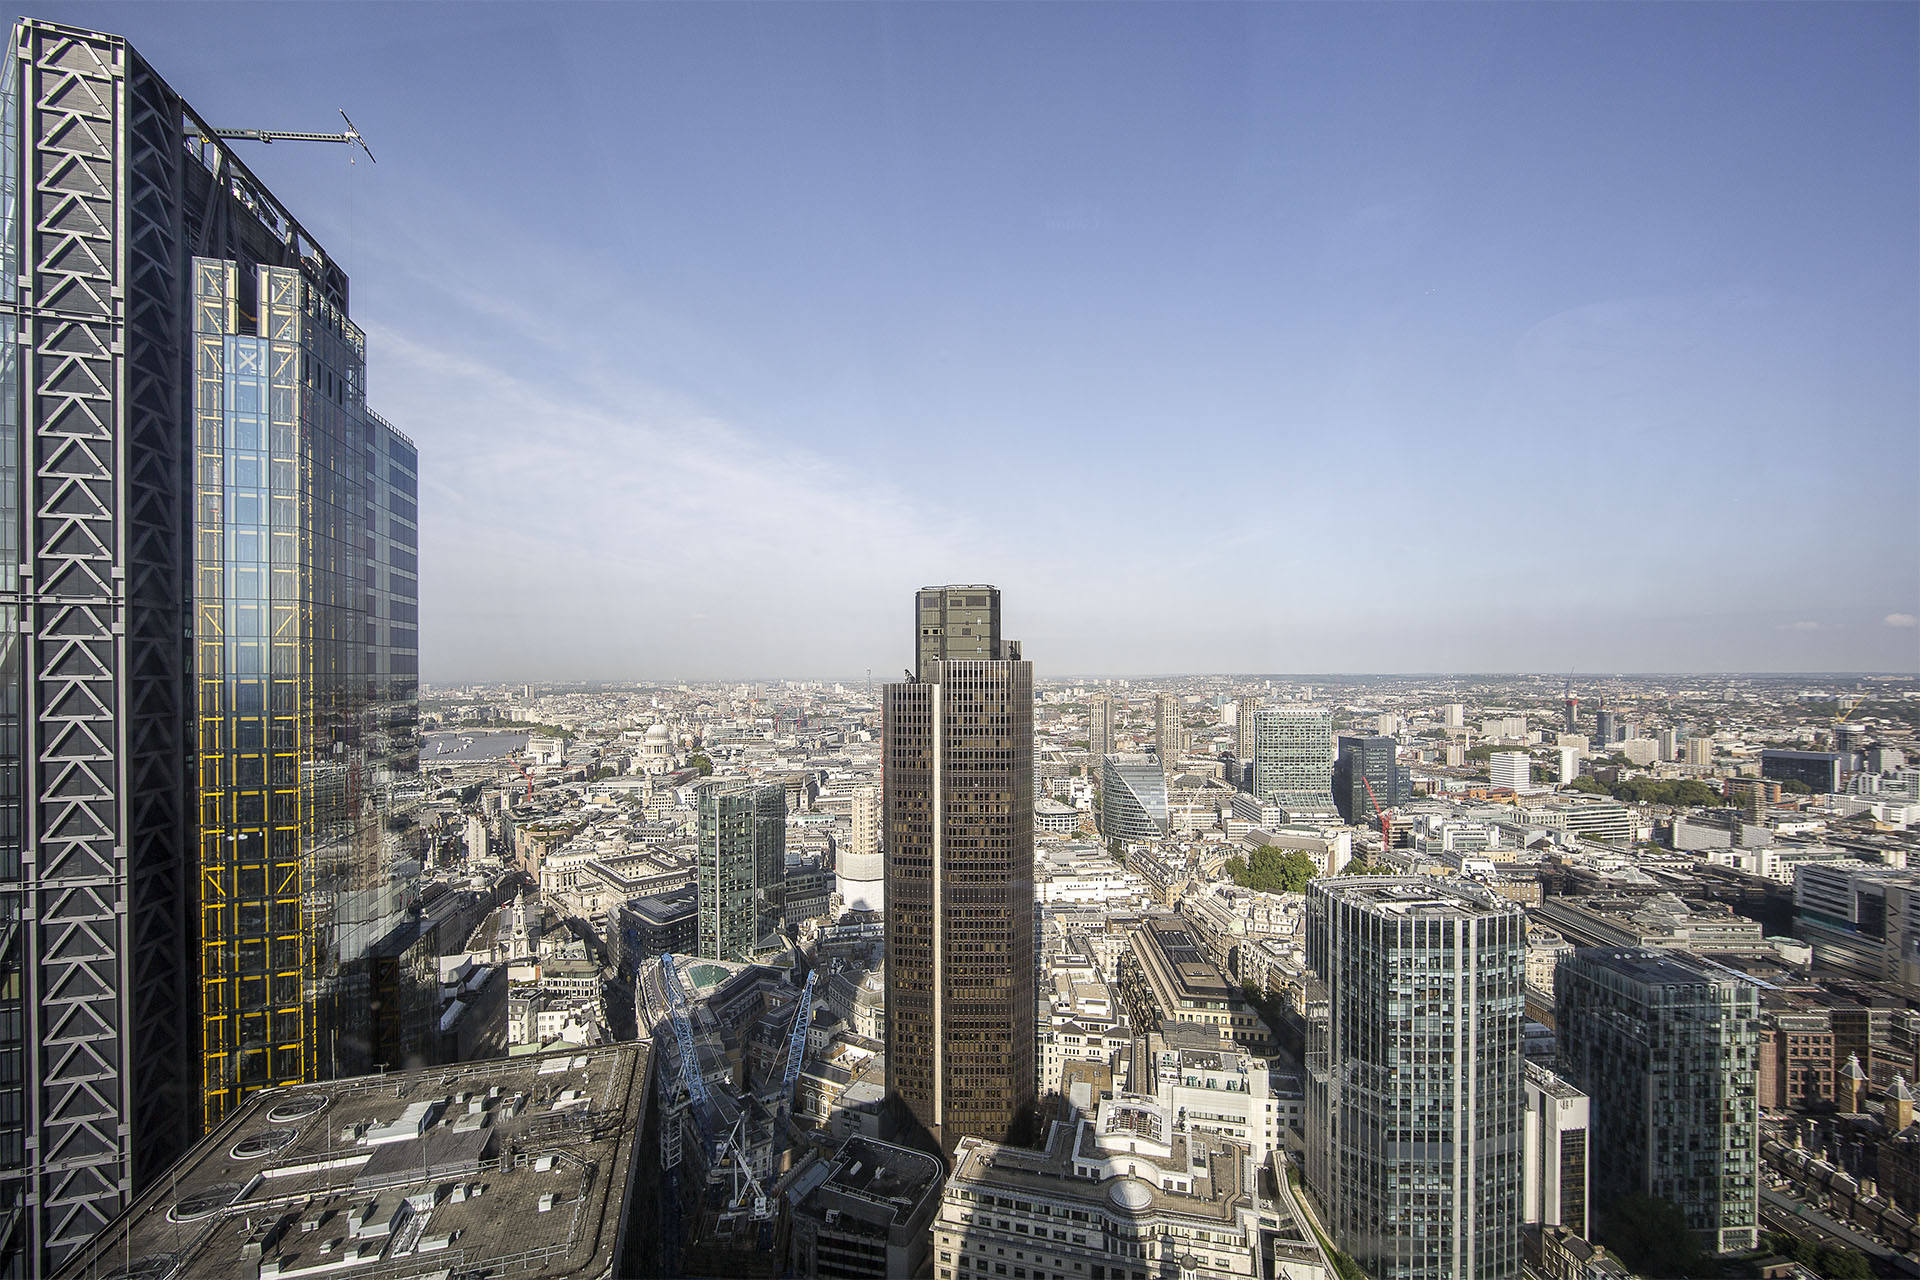 The Leadenhall Building and Tower 42